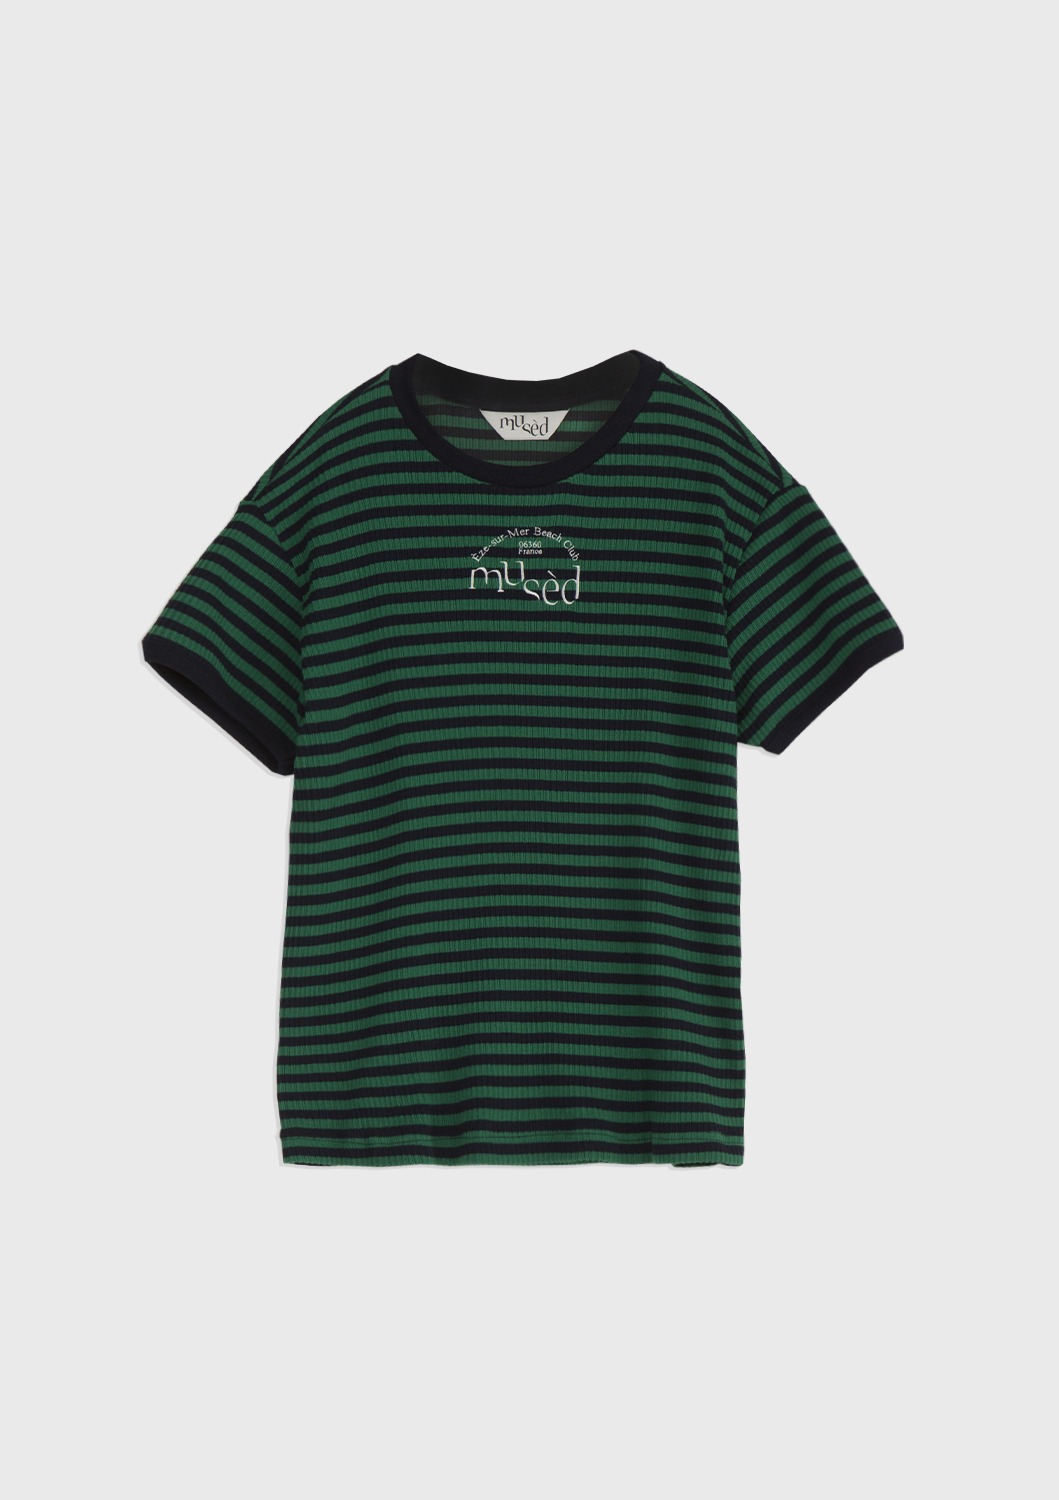 Contrast Rib Patched T-shirt - Green Stripe